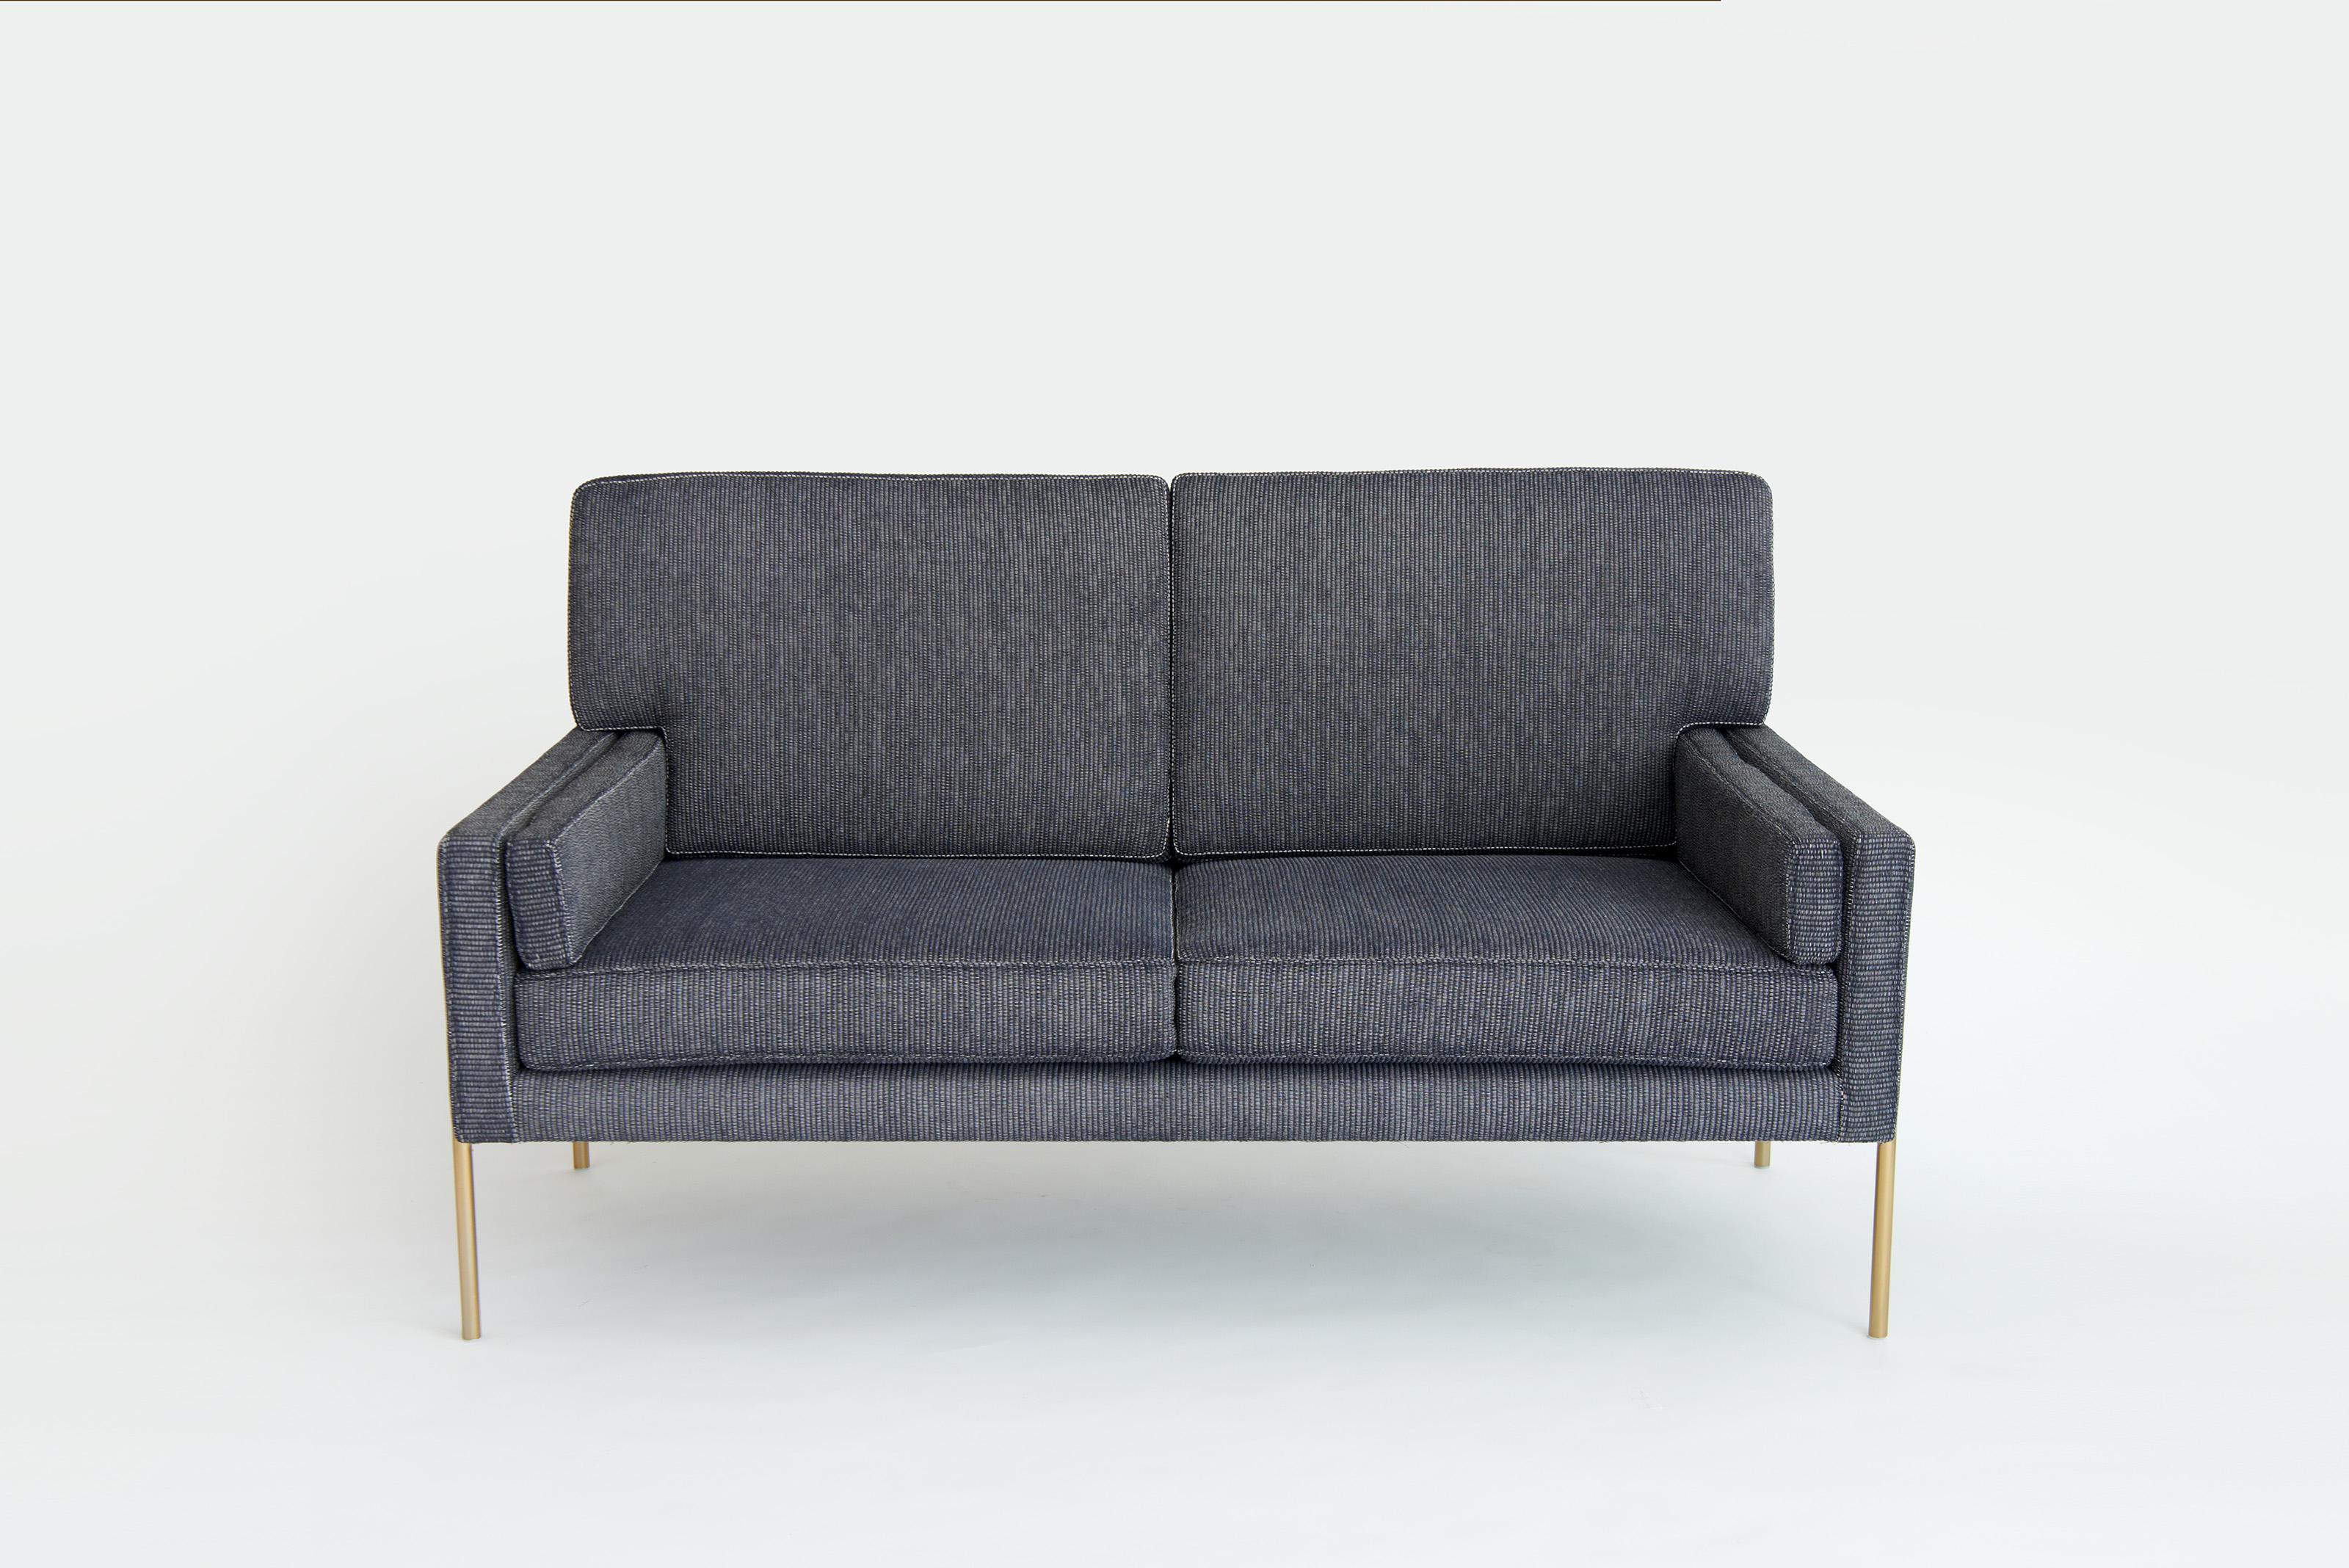 Trolley Love Seat by Phase Design
Dimensions: D 77.5 x W 146.7 x H 81.3 cm. 
Materials: Upholstery and smoked brass.

Solid steel bar available in a smoked brass, polished chrome, burnt copper, or powder coat finish with upholstered top. Powder coat